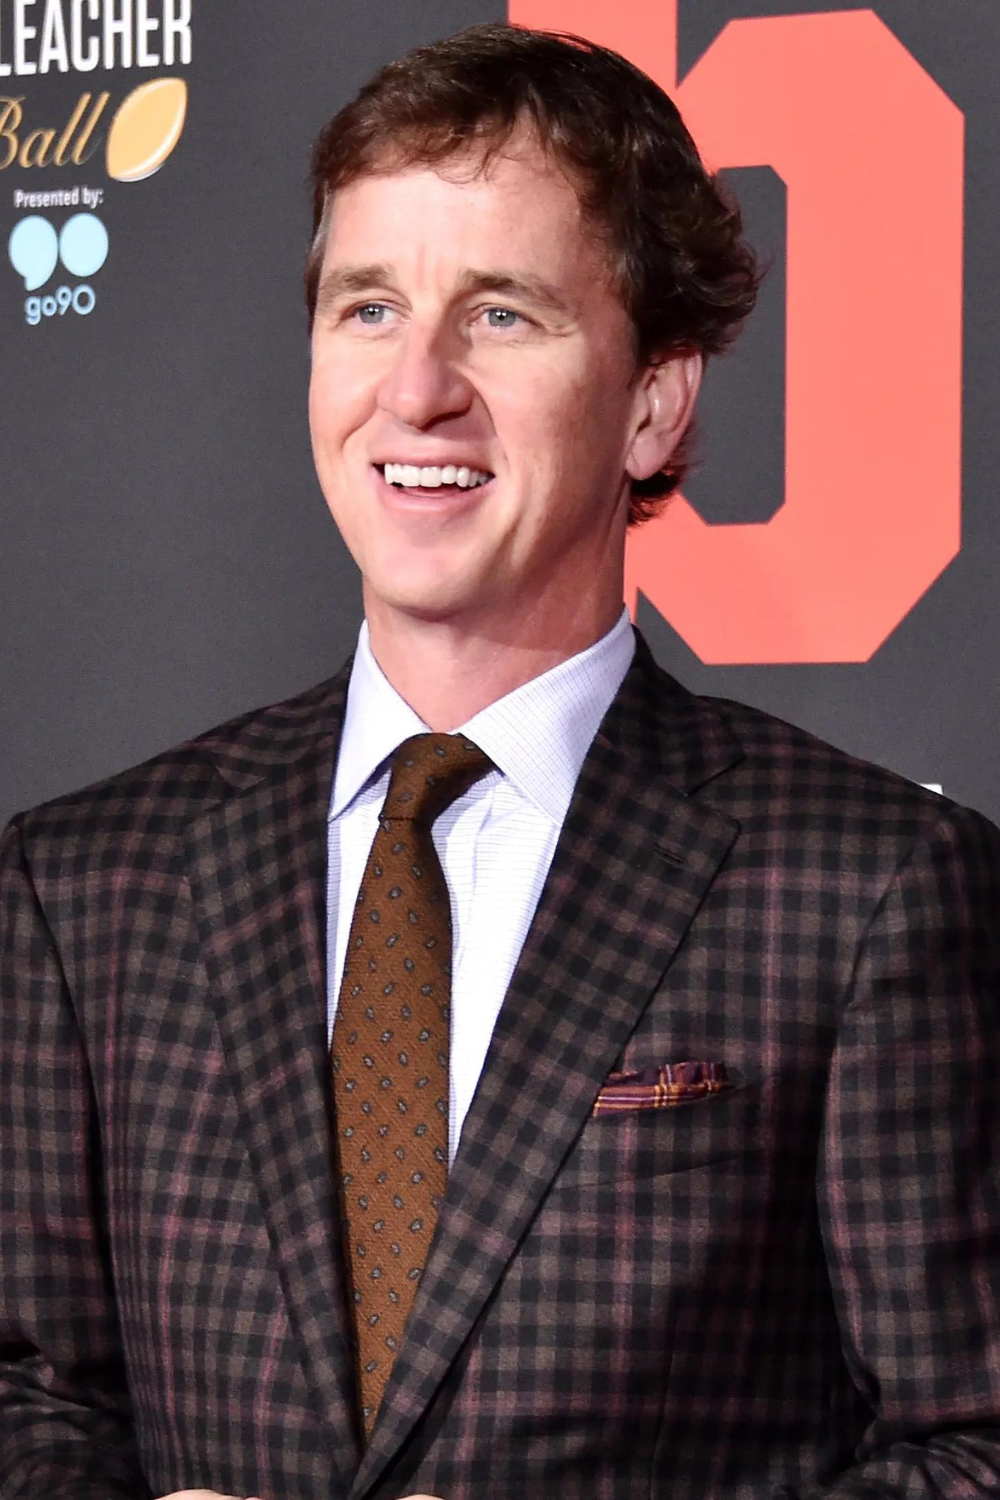 Cooper Manning, An American Entrepreneur And Television Host